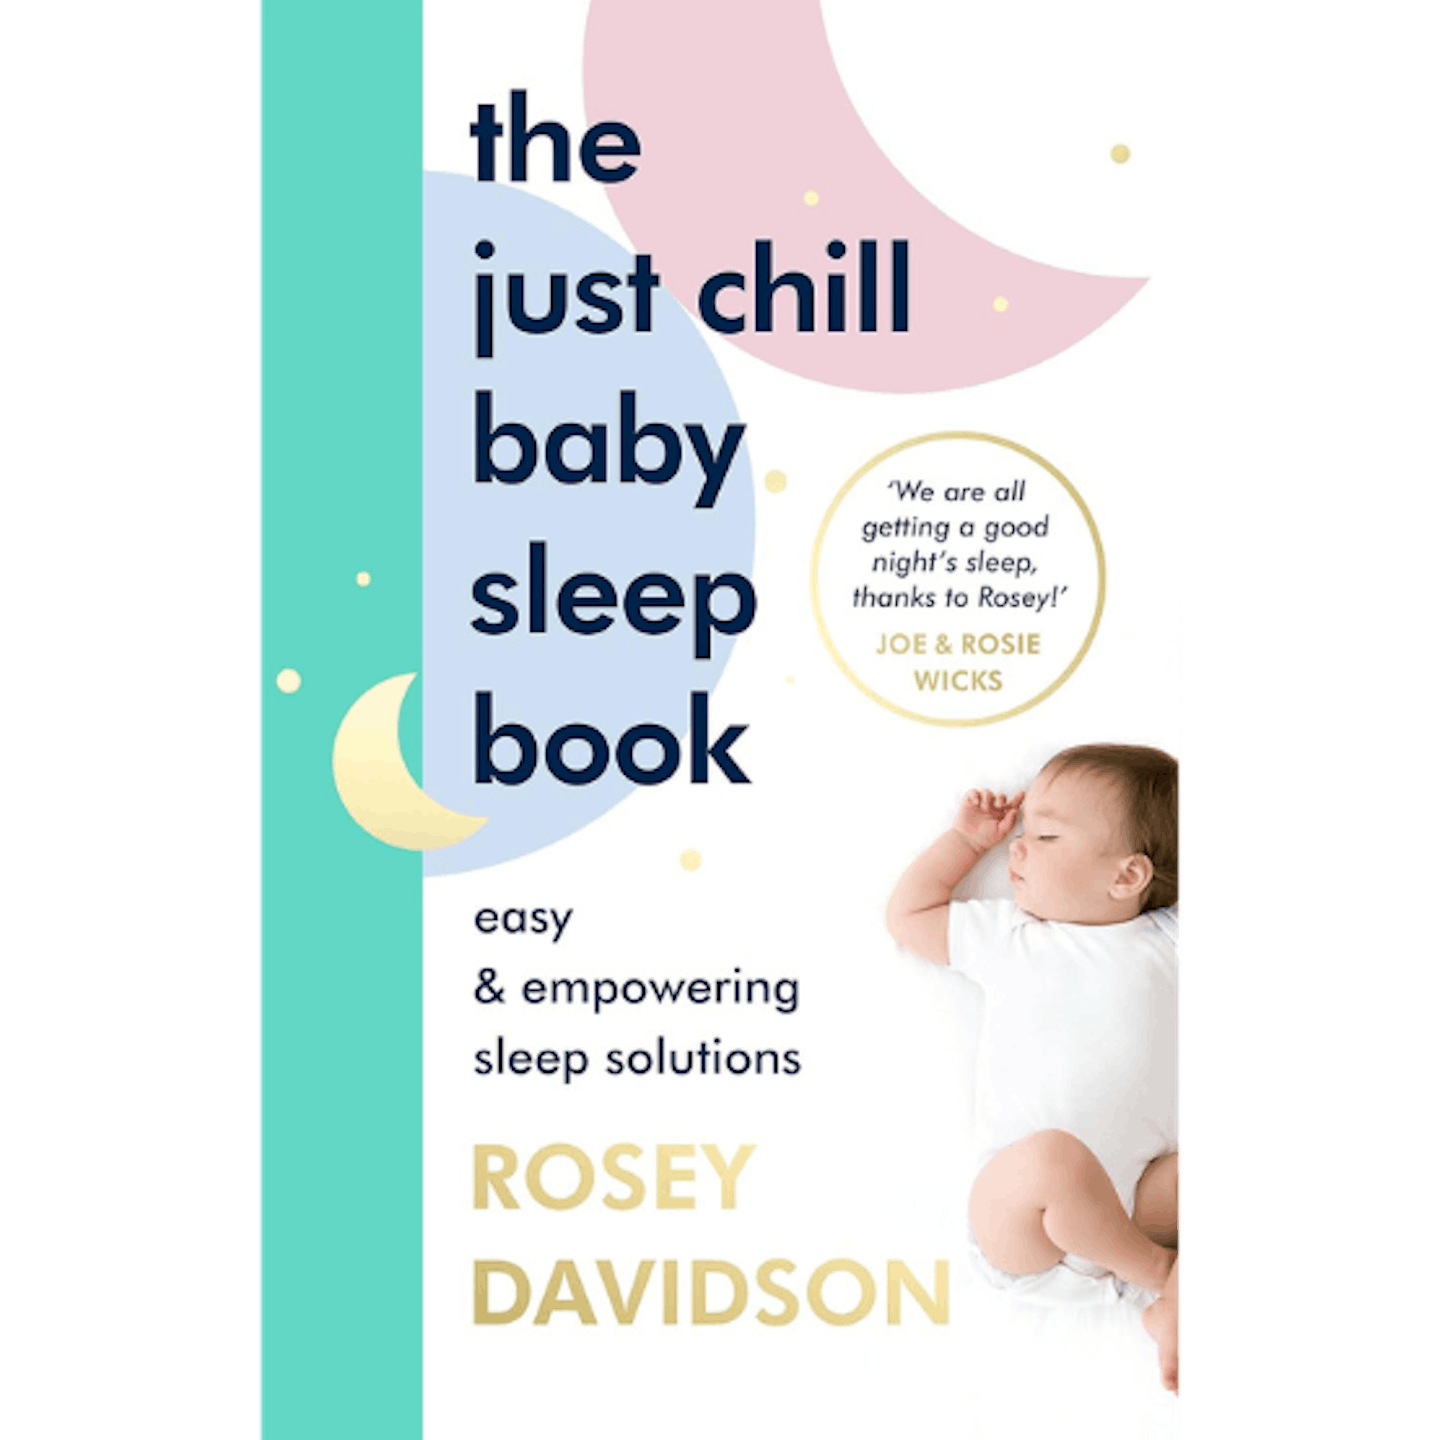 Laura Anderson Best buys Just Chill baby sleep book